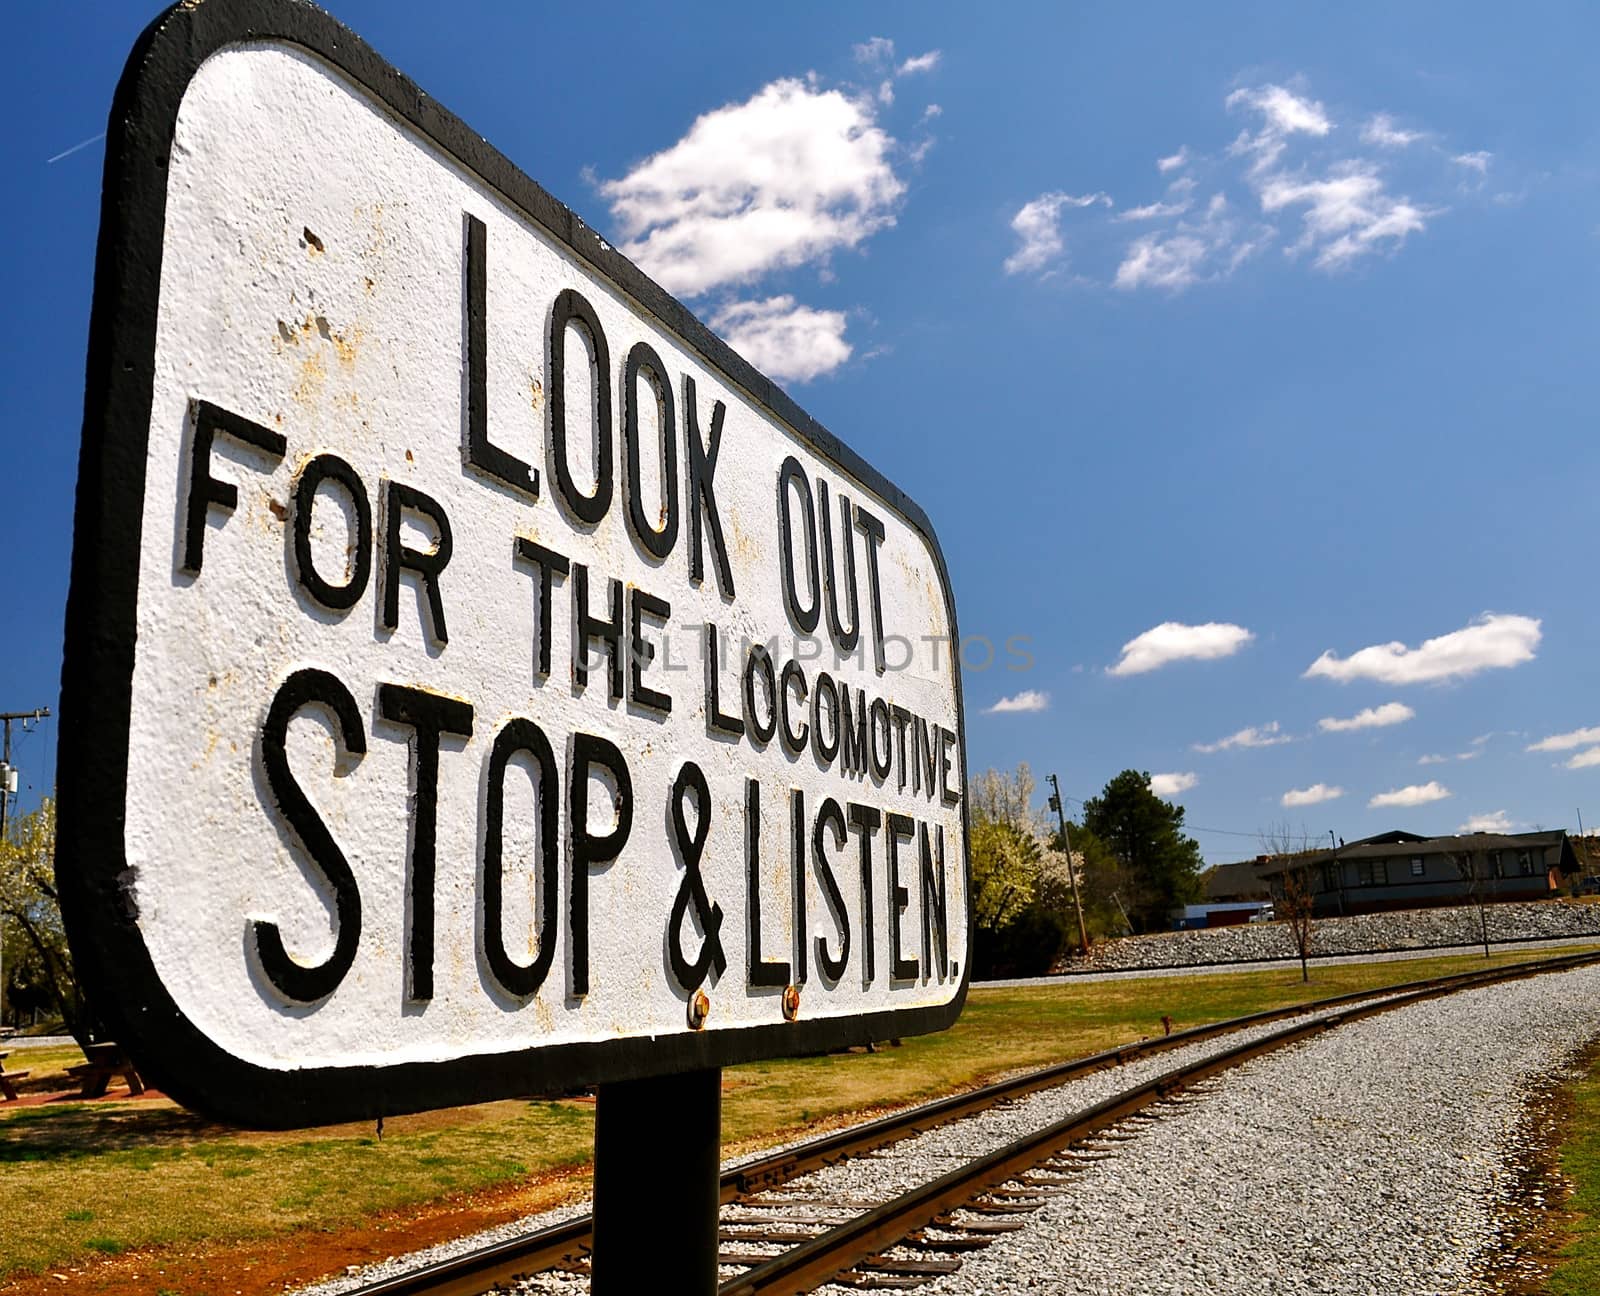 Look Out for the Locomotive Sign by RefocusPhoto